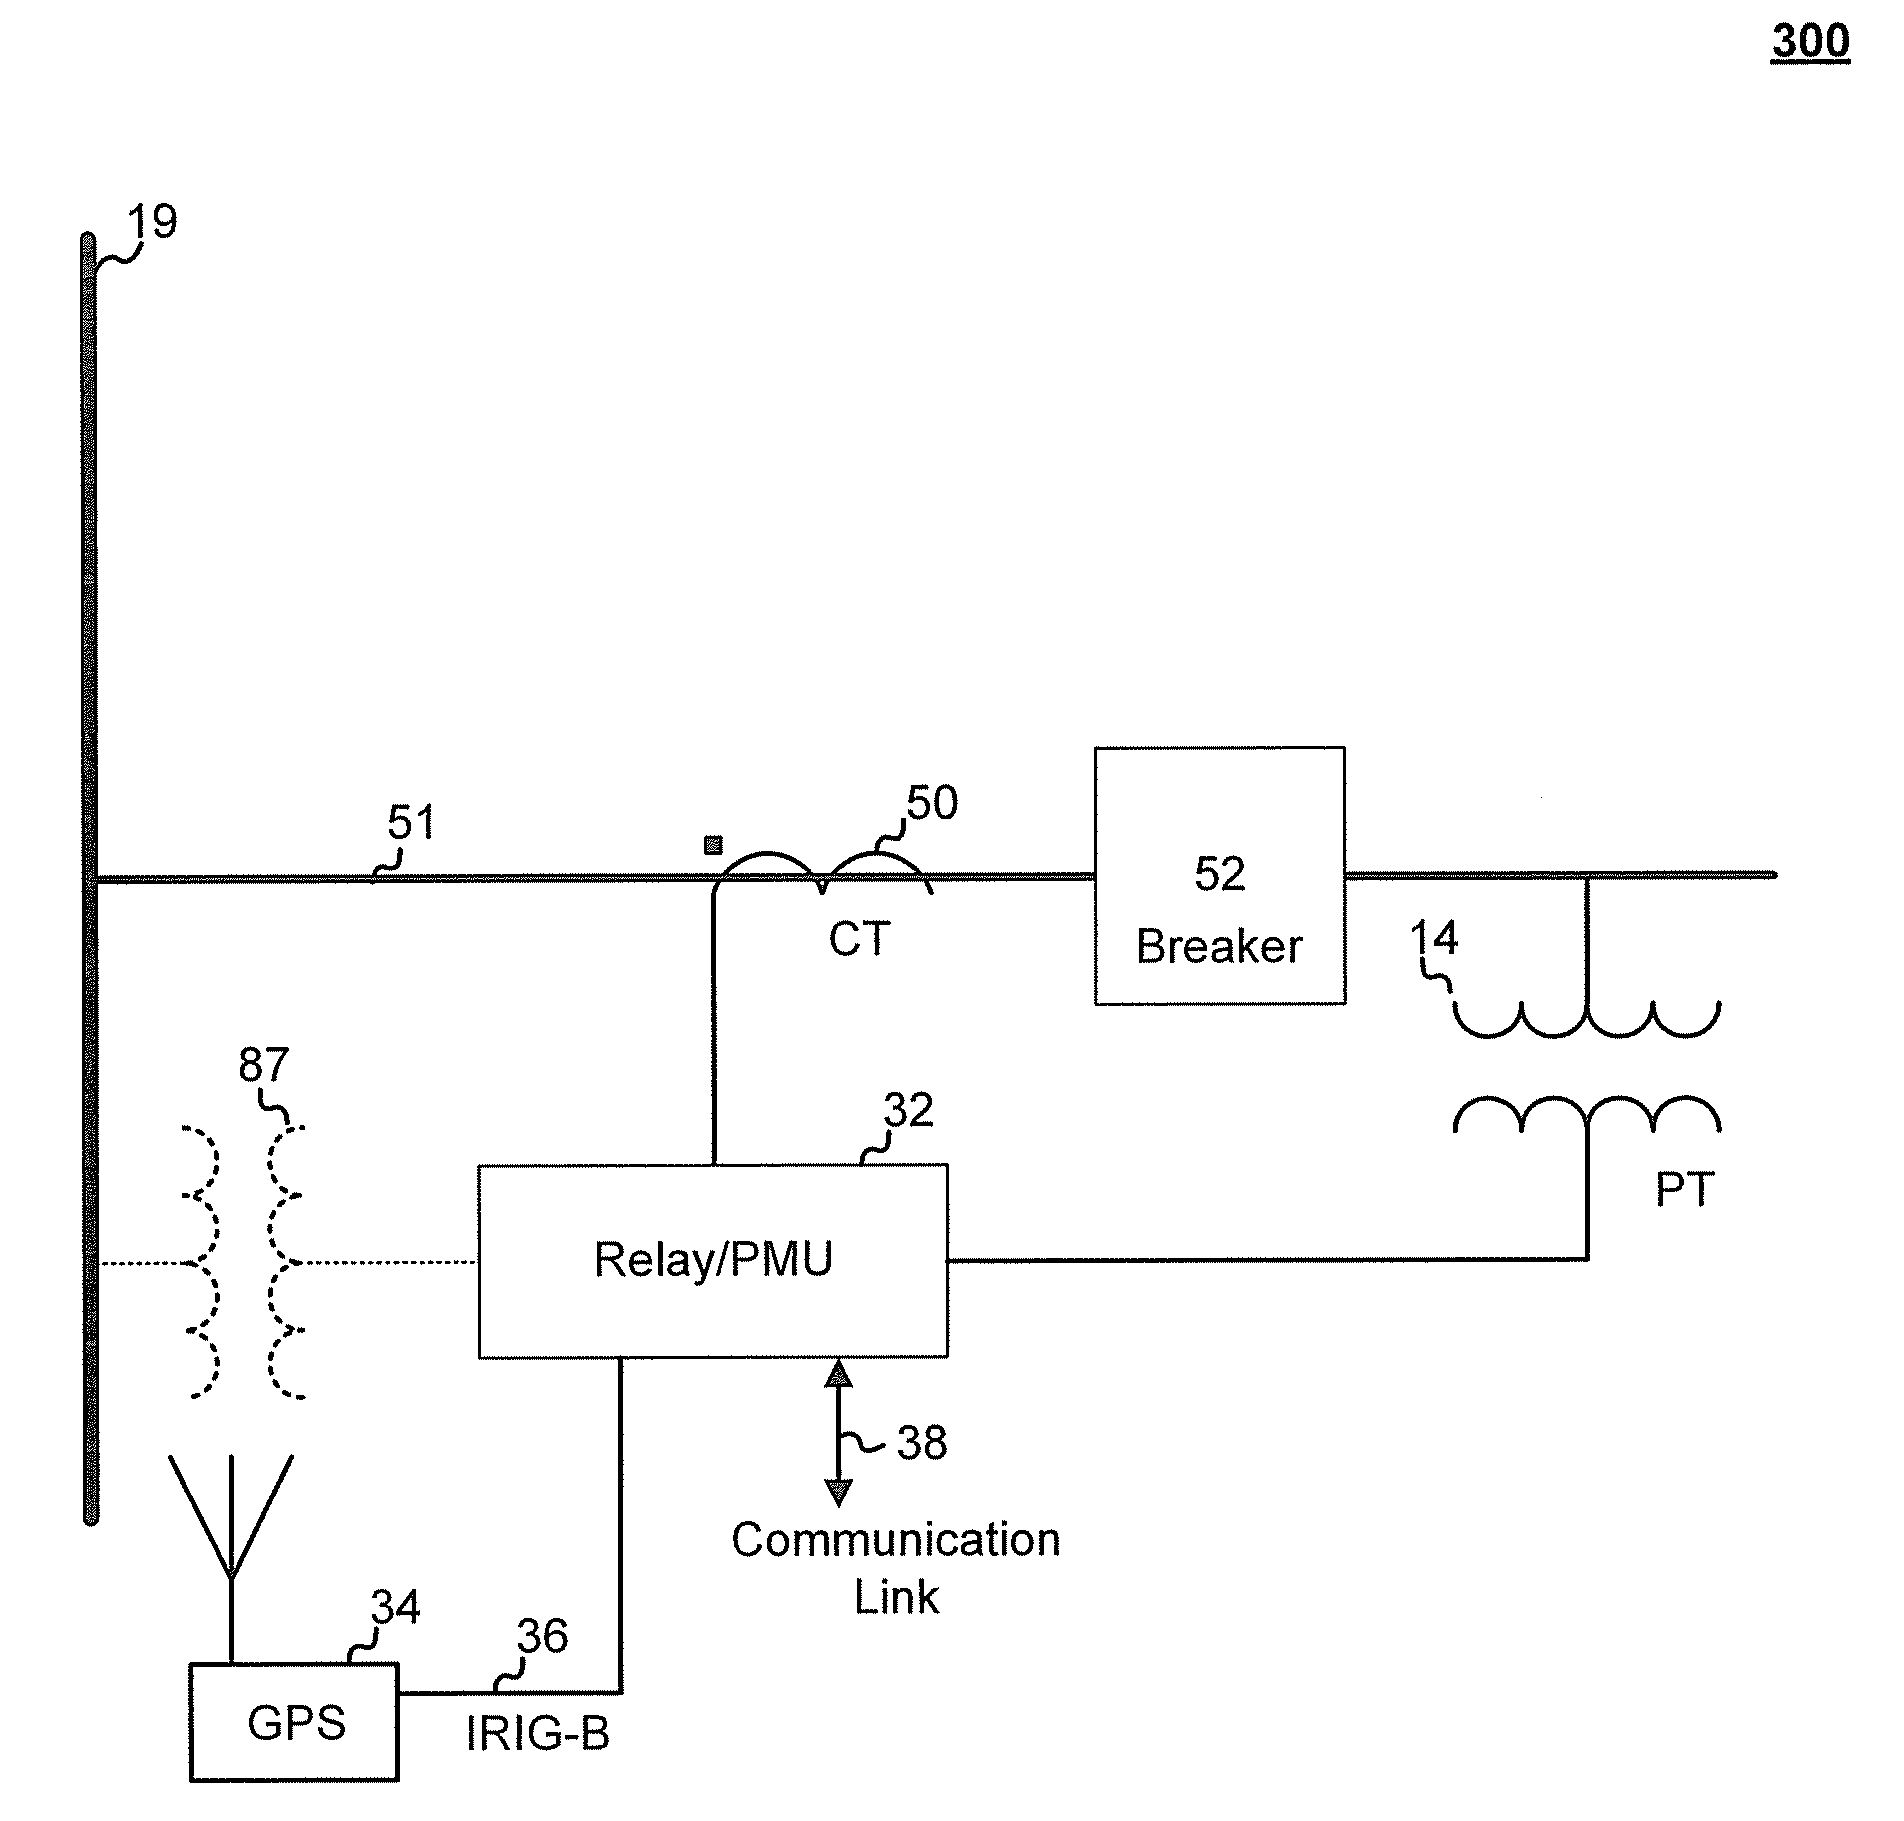 Method of visualizing power system quantities using a configurable software visualization tool